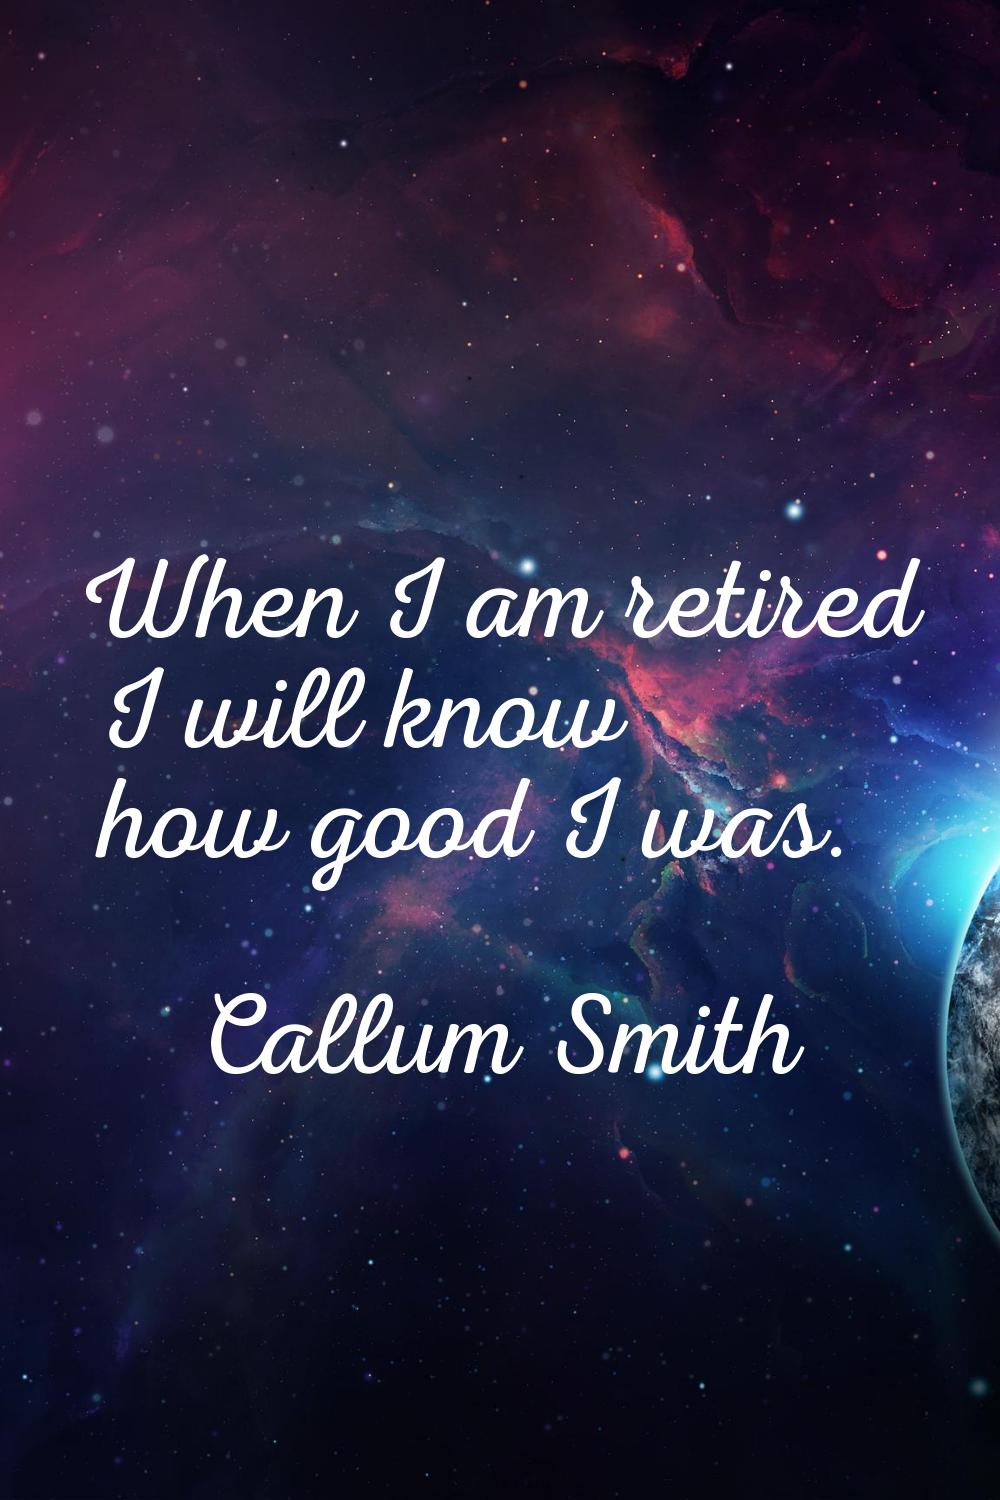 When I am retired I will know how good I was.